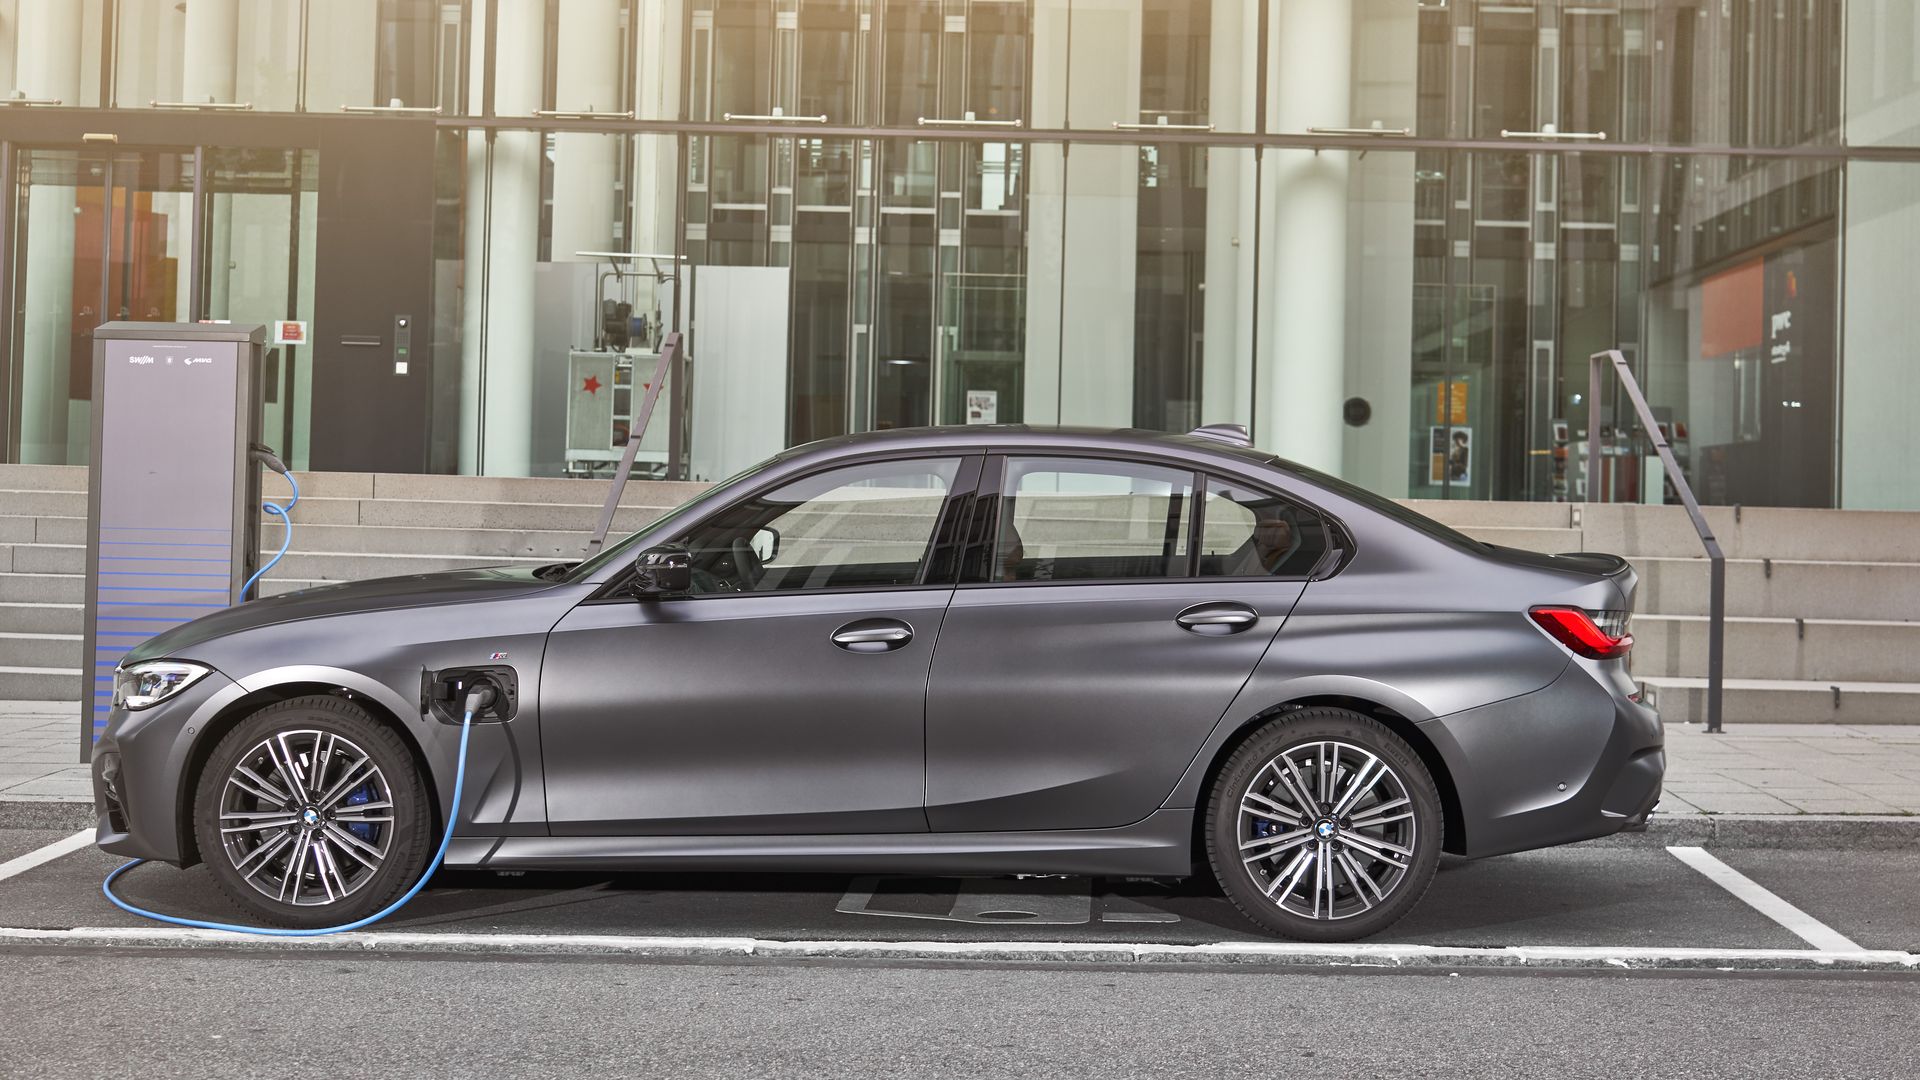 Image of a plug-in hybrid BMW 330e sedan plugged into a charging station